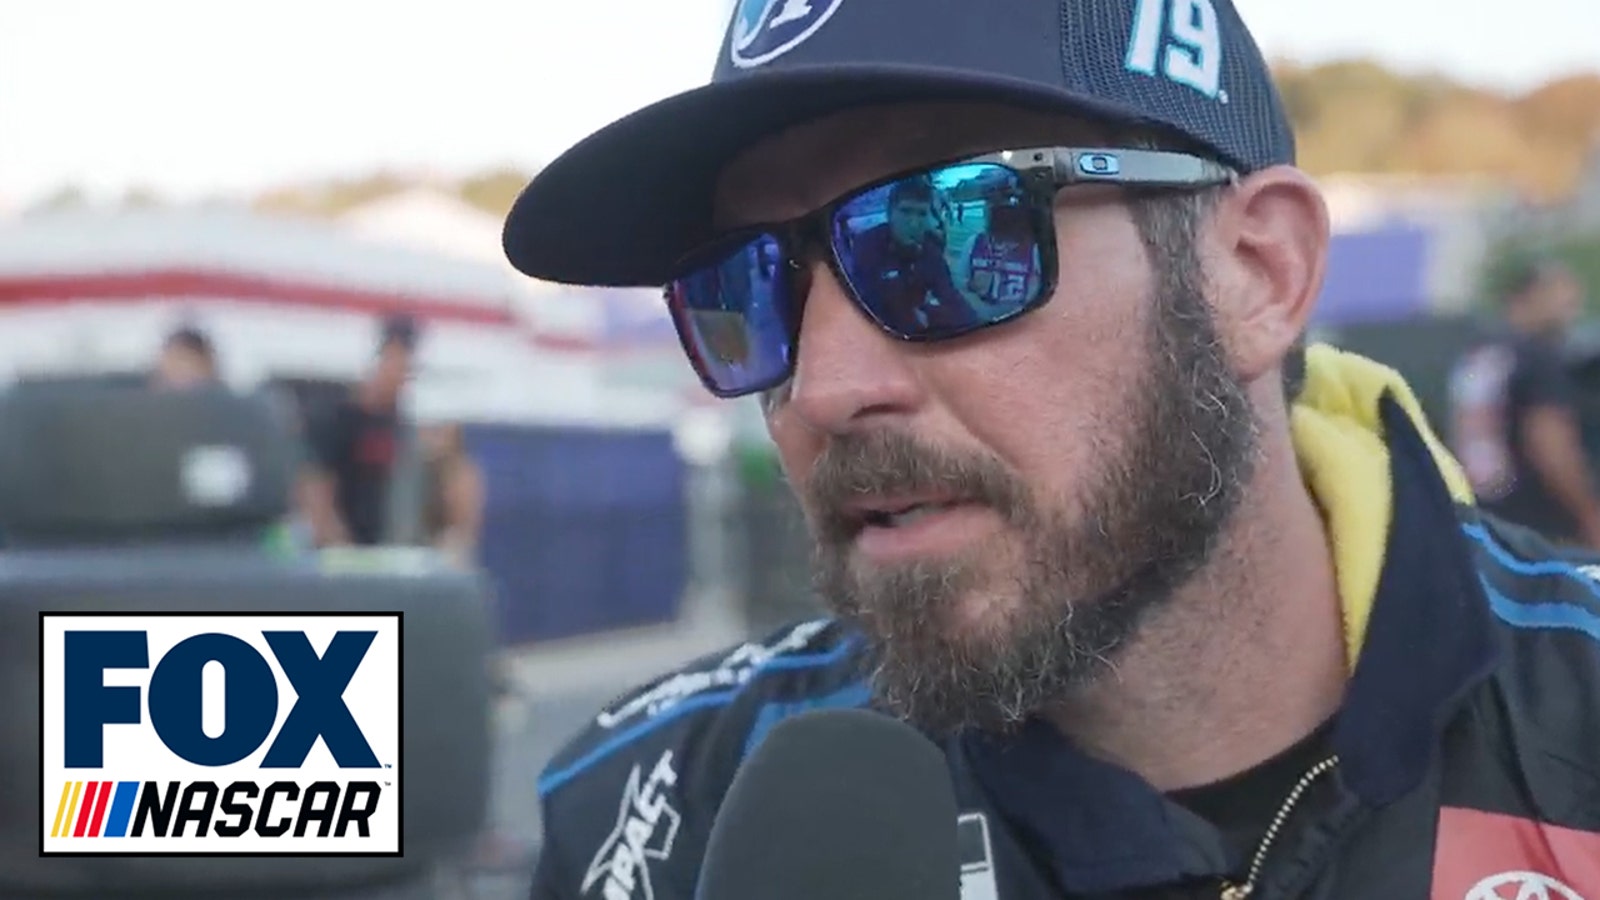 Martin Truex Jr. was surprised he sped on pit road and discussed being eliminated